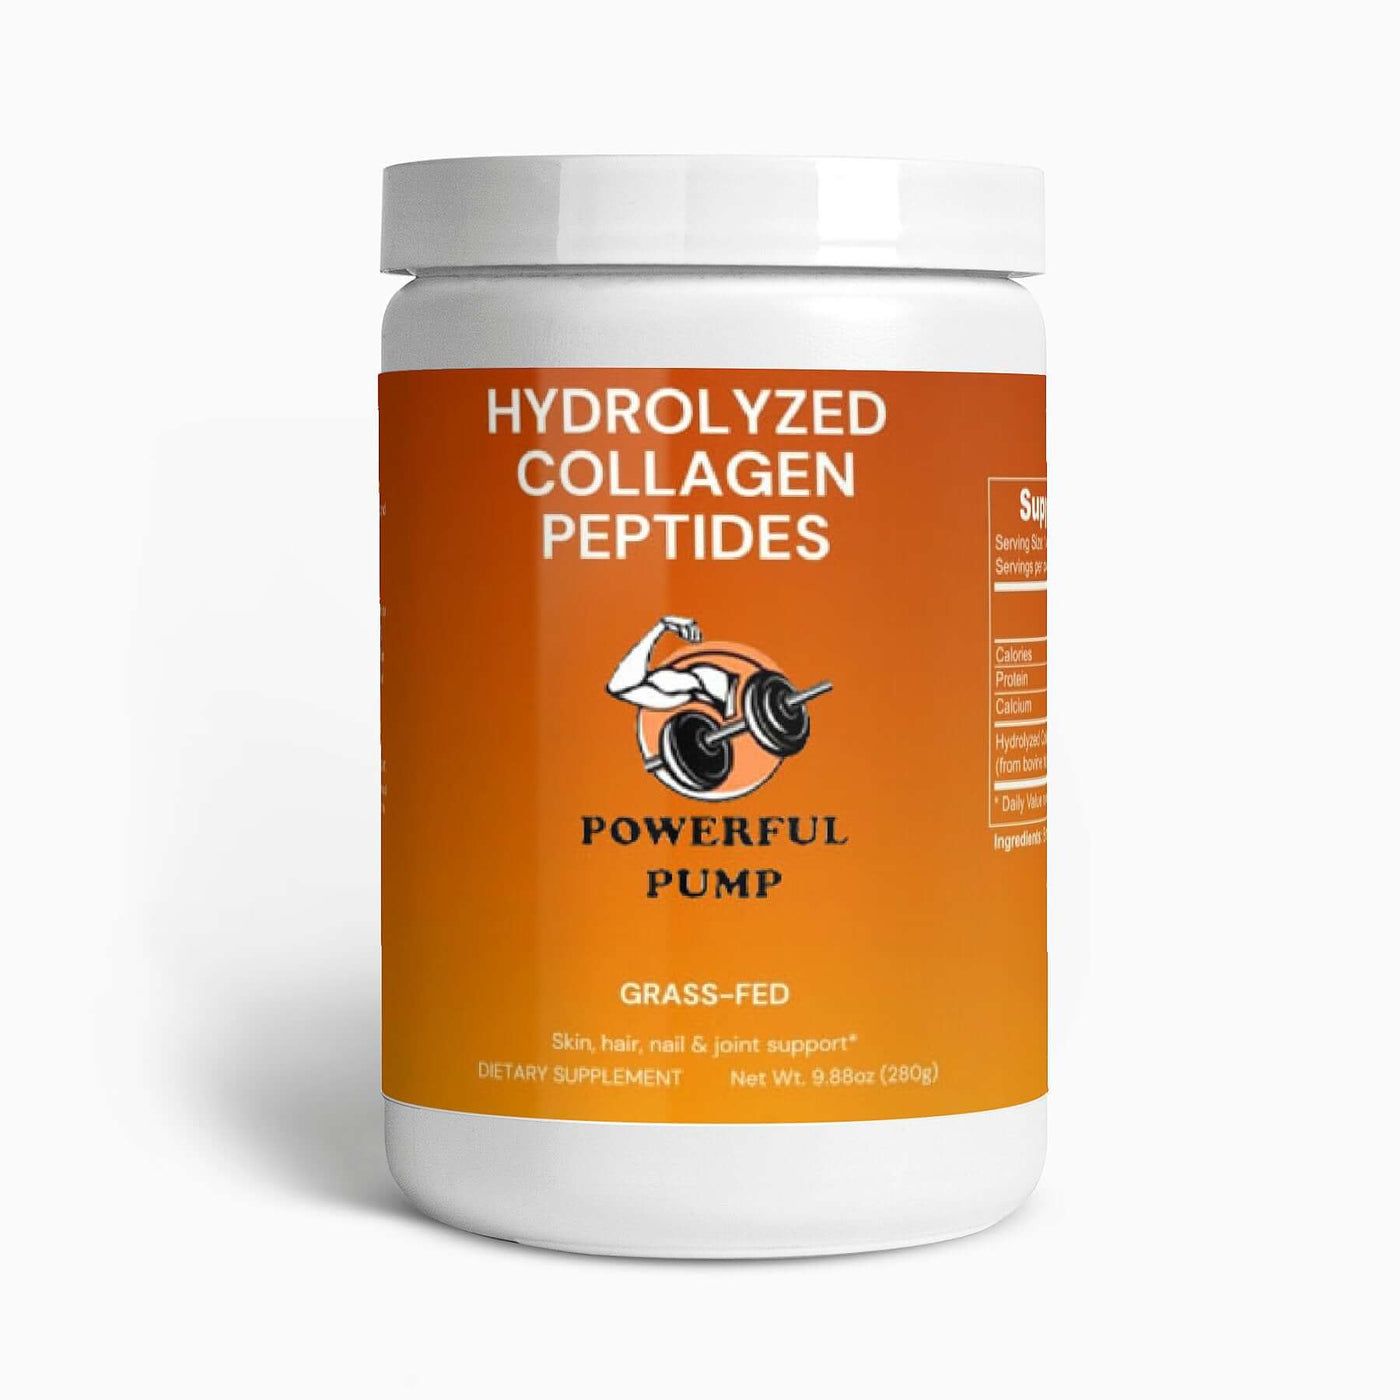 Grass-Fed Hydrolyzed Collagen Peptides: Premium collagen supplement sourced from grass-fed sources, promoting skin, joint, and overall connective tissue health.